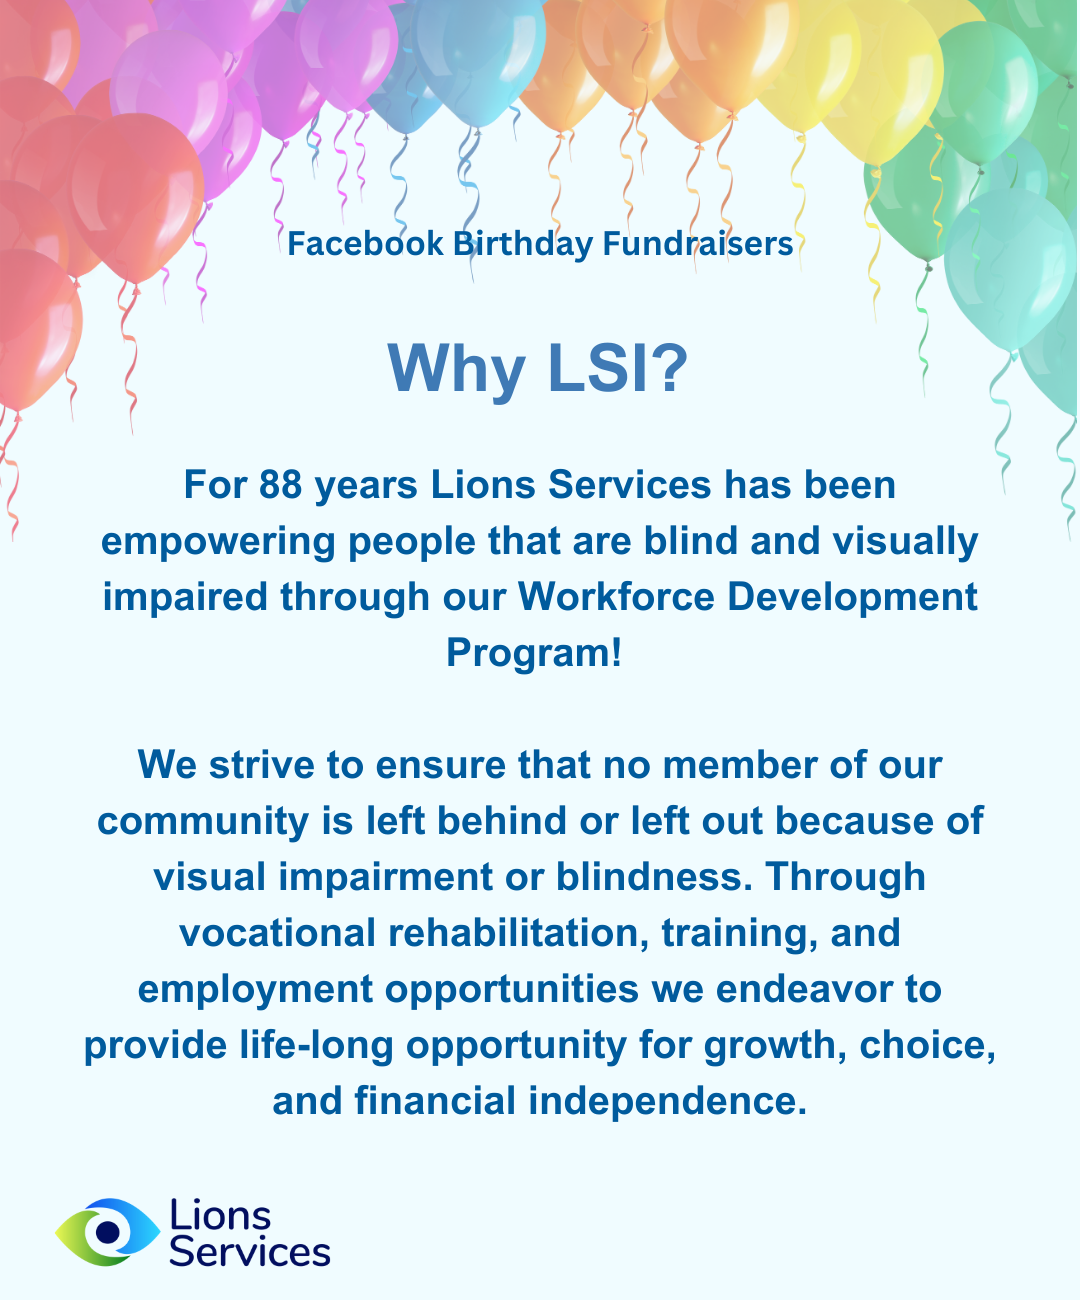 For 88 years Lions Services has been empowering people that are blind and visually impaired through our Workforce Development Program! We strive to ensure that no member of our community is left behind or left out because of visual impairment or blindness. Through vocational rehabilitation, training, and employment opportunities we endeavor to provide life-long opportunity for growth, choice, and financial independence.